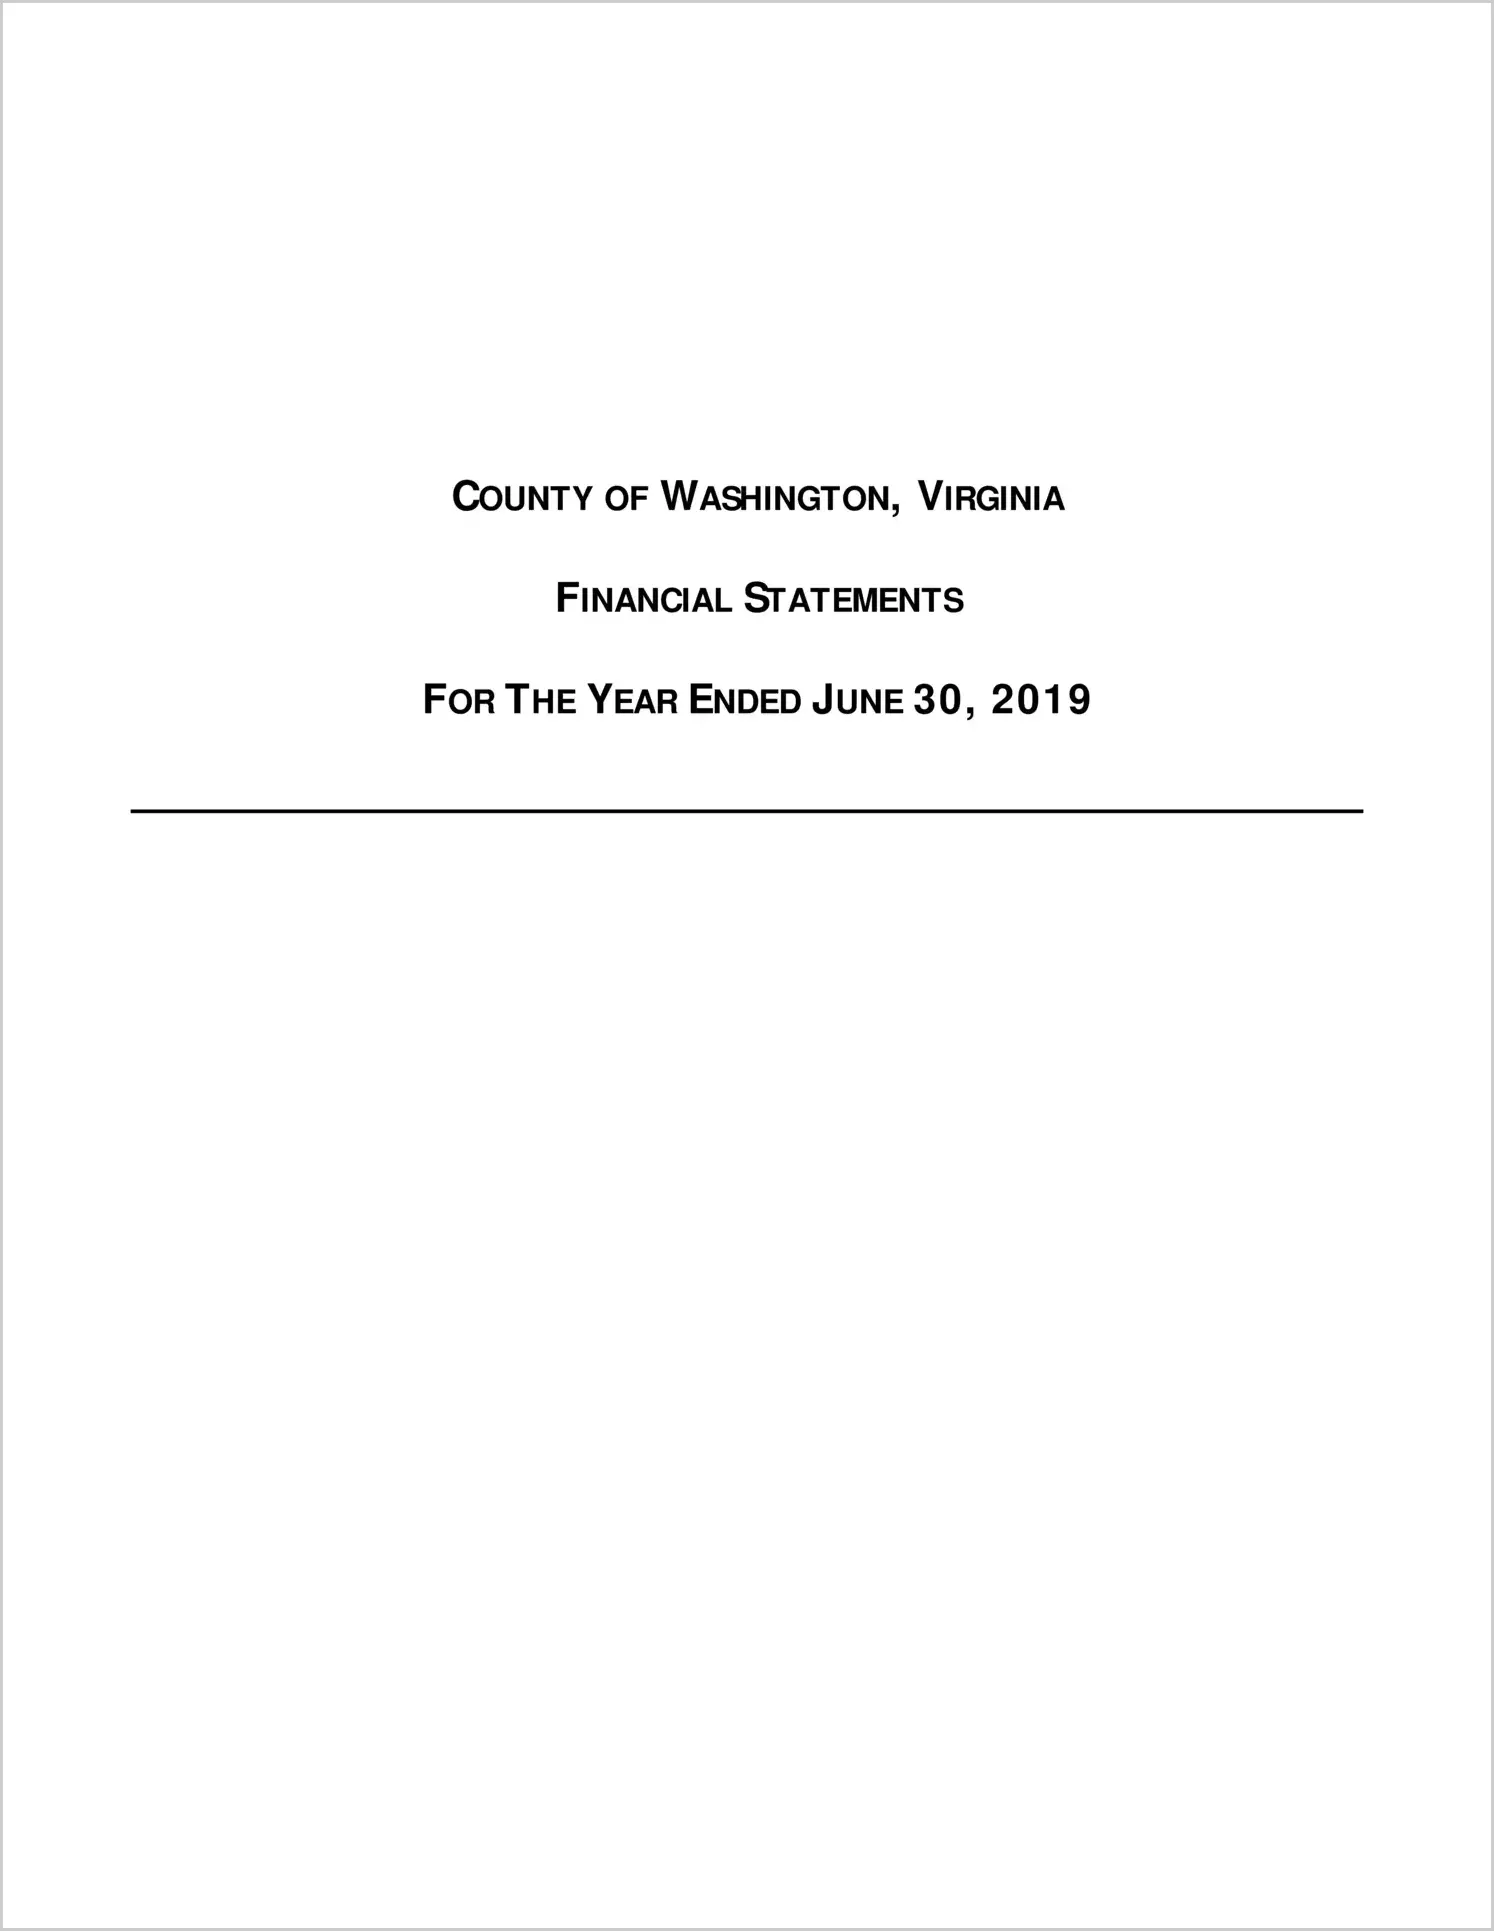 2019 Annual Financial Report for County of Washington